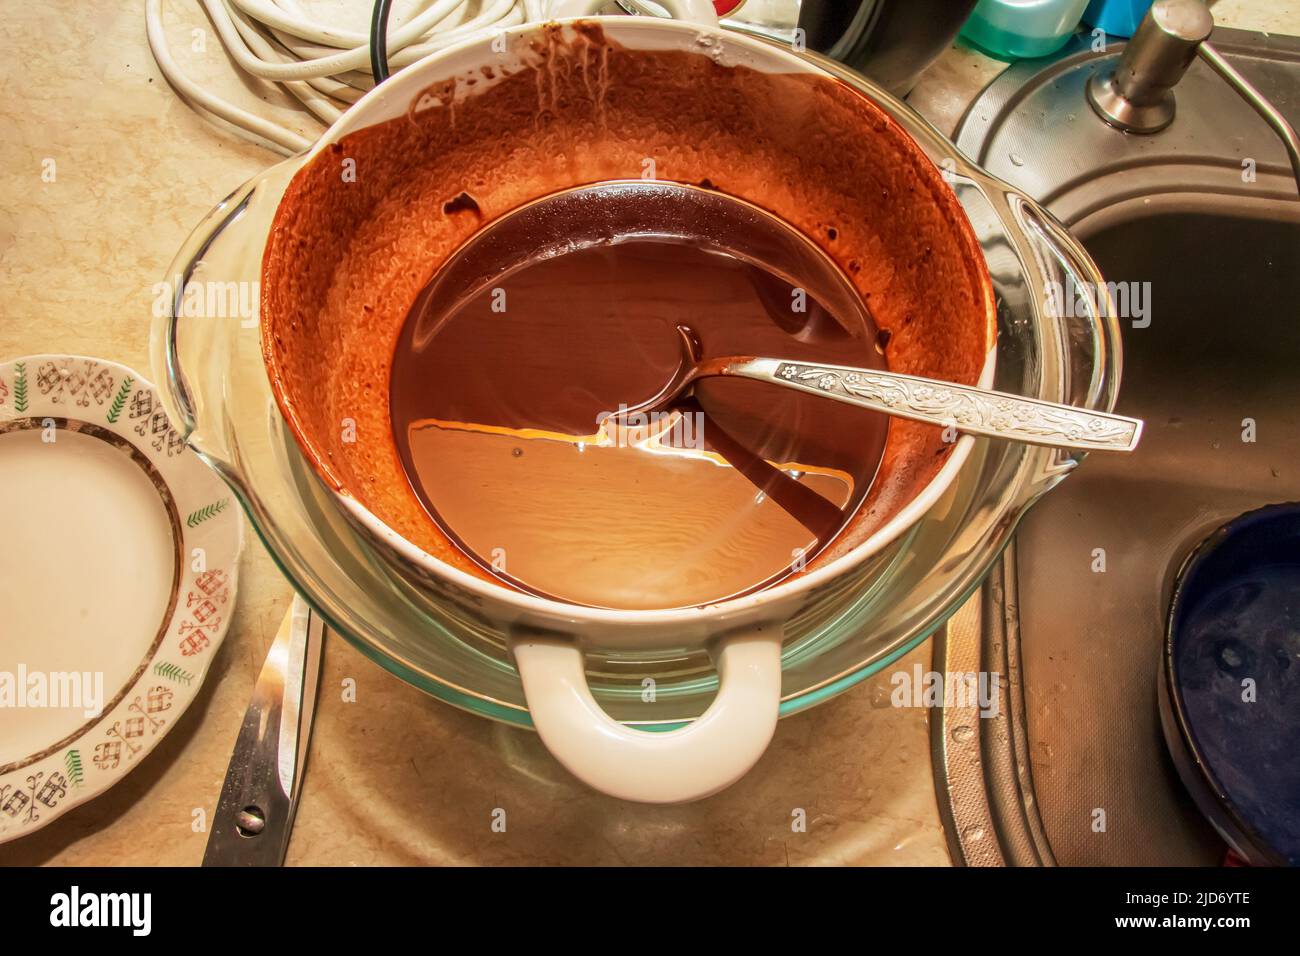 Homemade hot chocolate is ready to be poured into silicone molds. Stock Photo